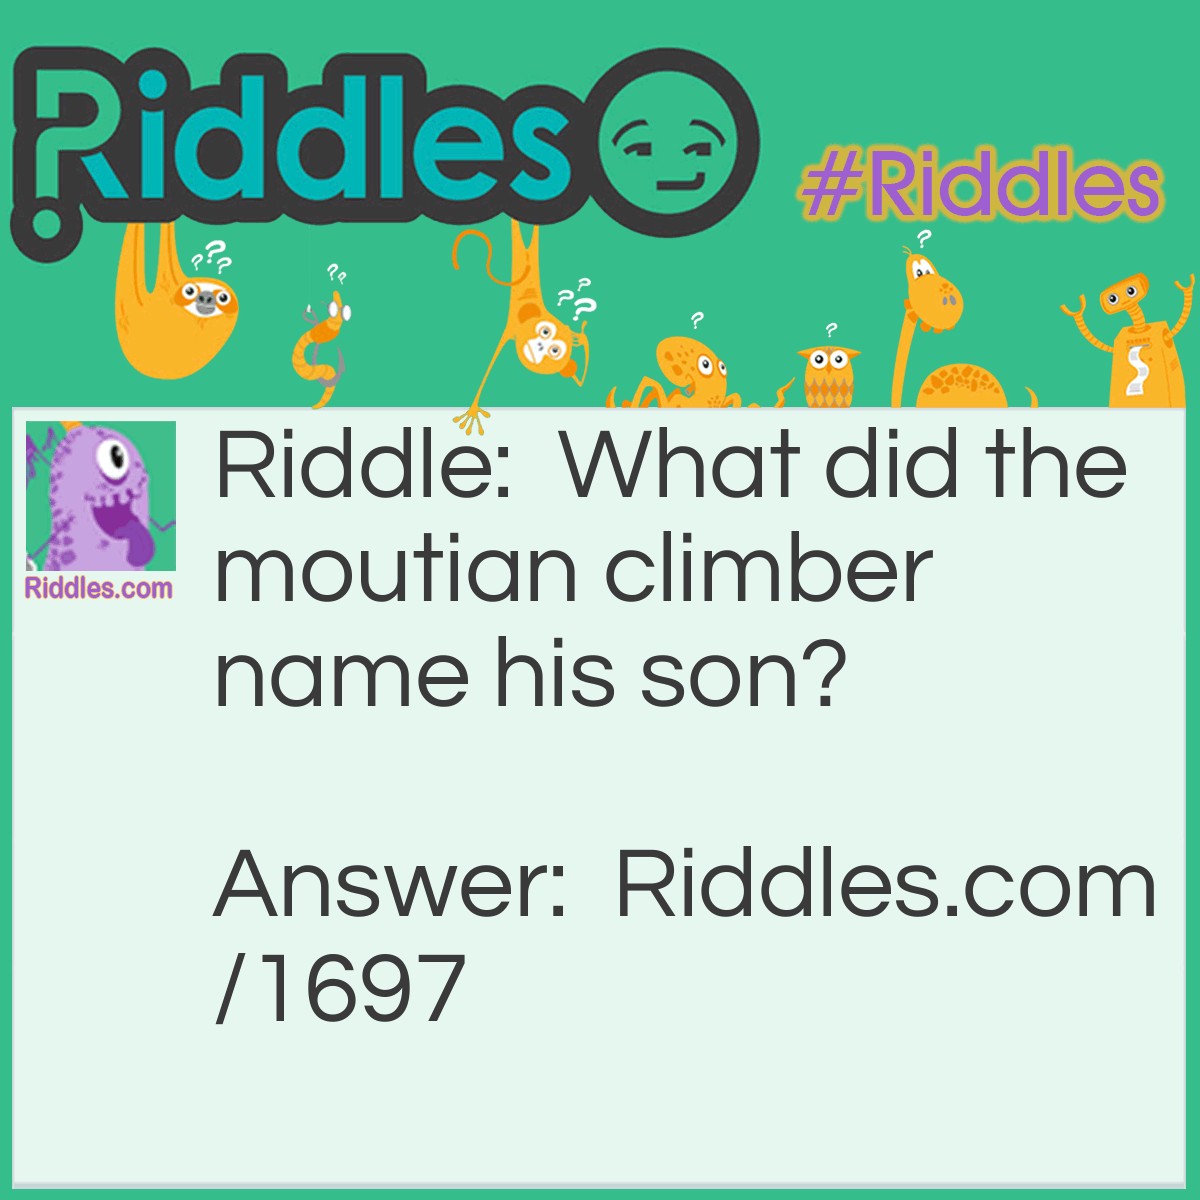 Riddle: What did the moutian climber name his son? Answer: Cliff.